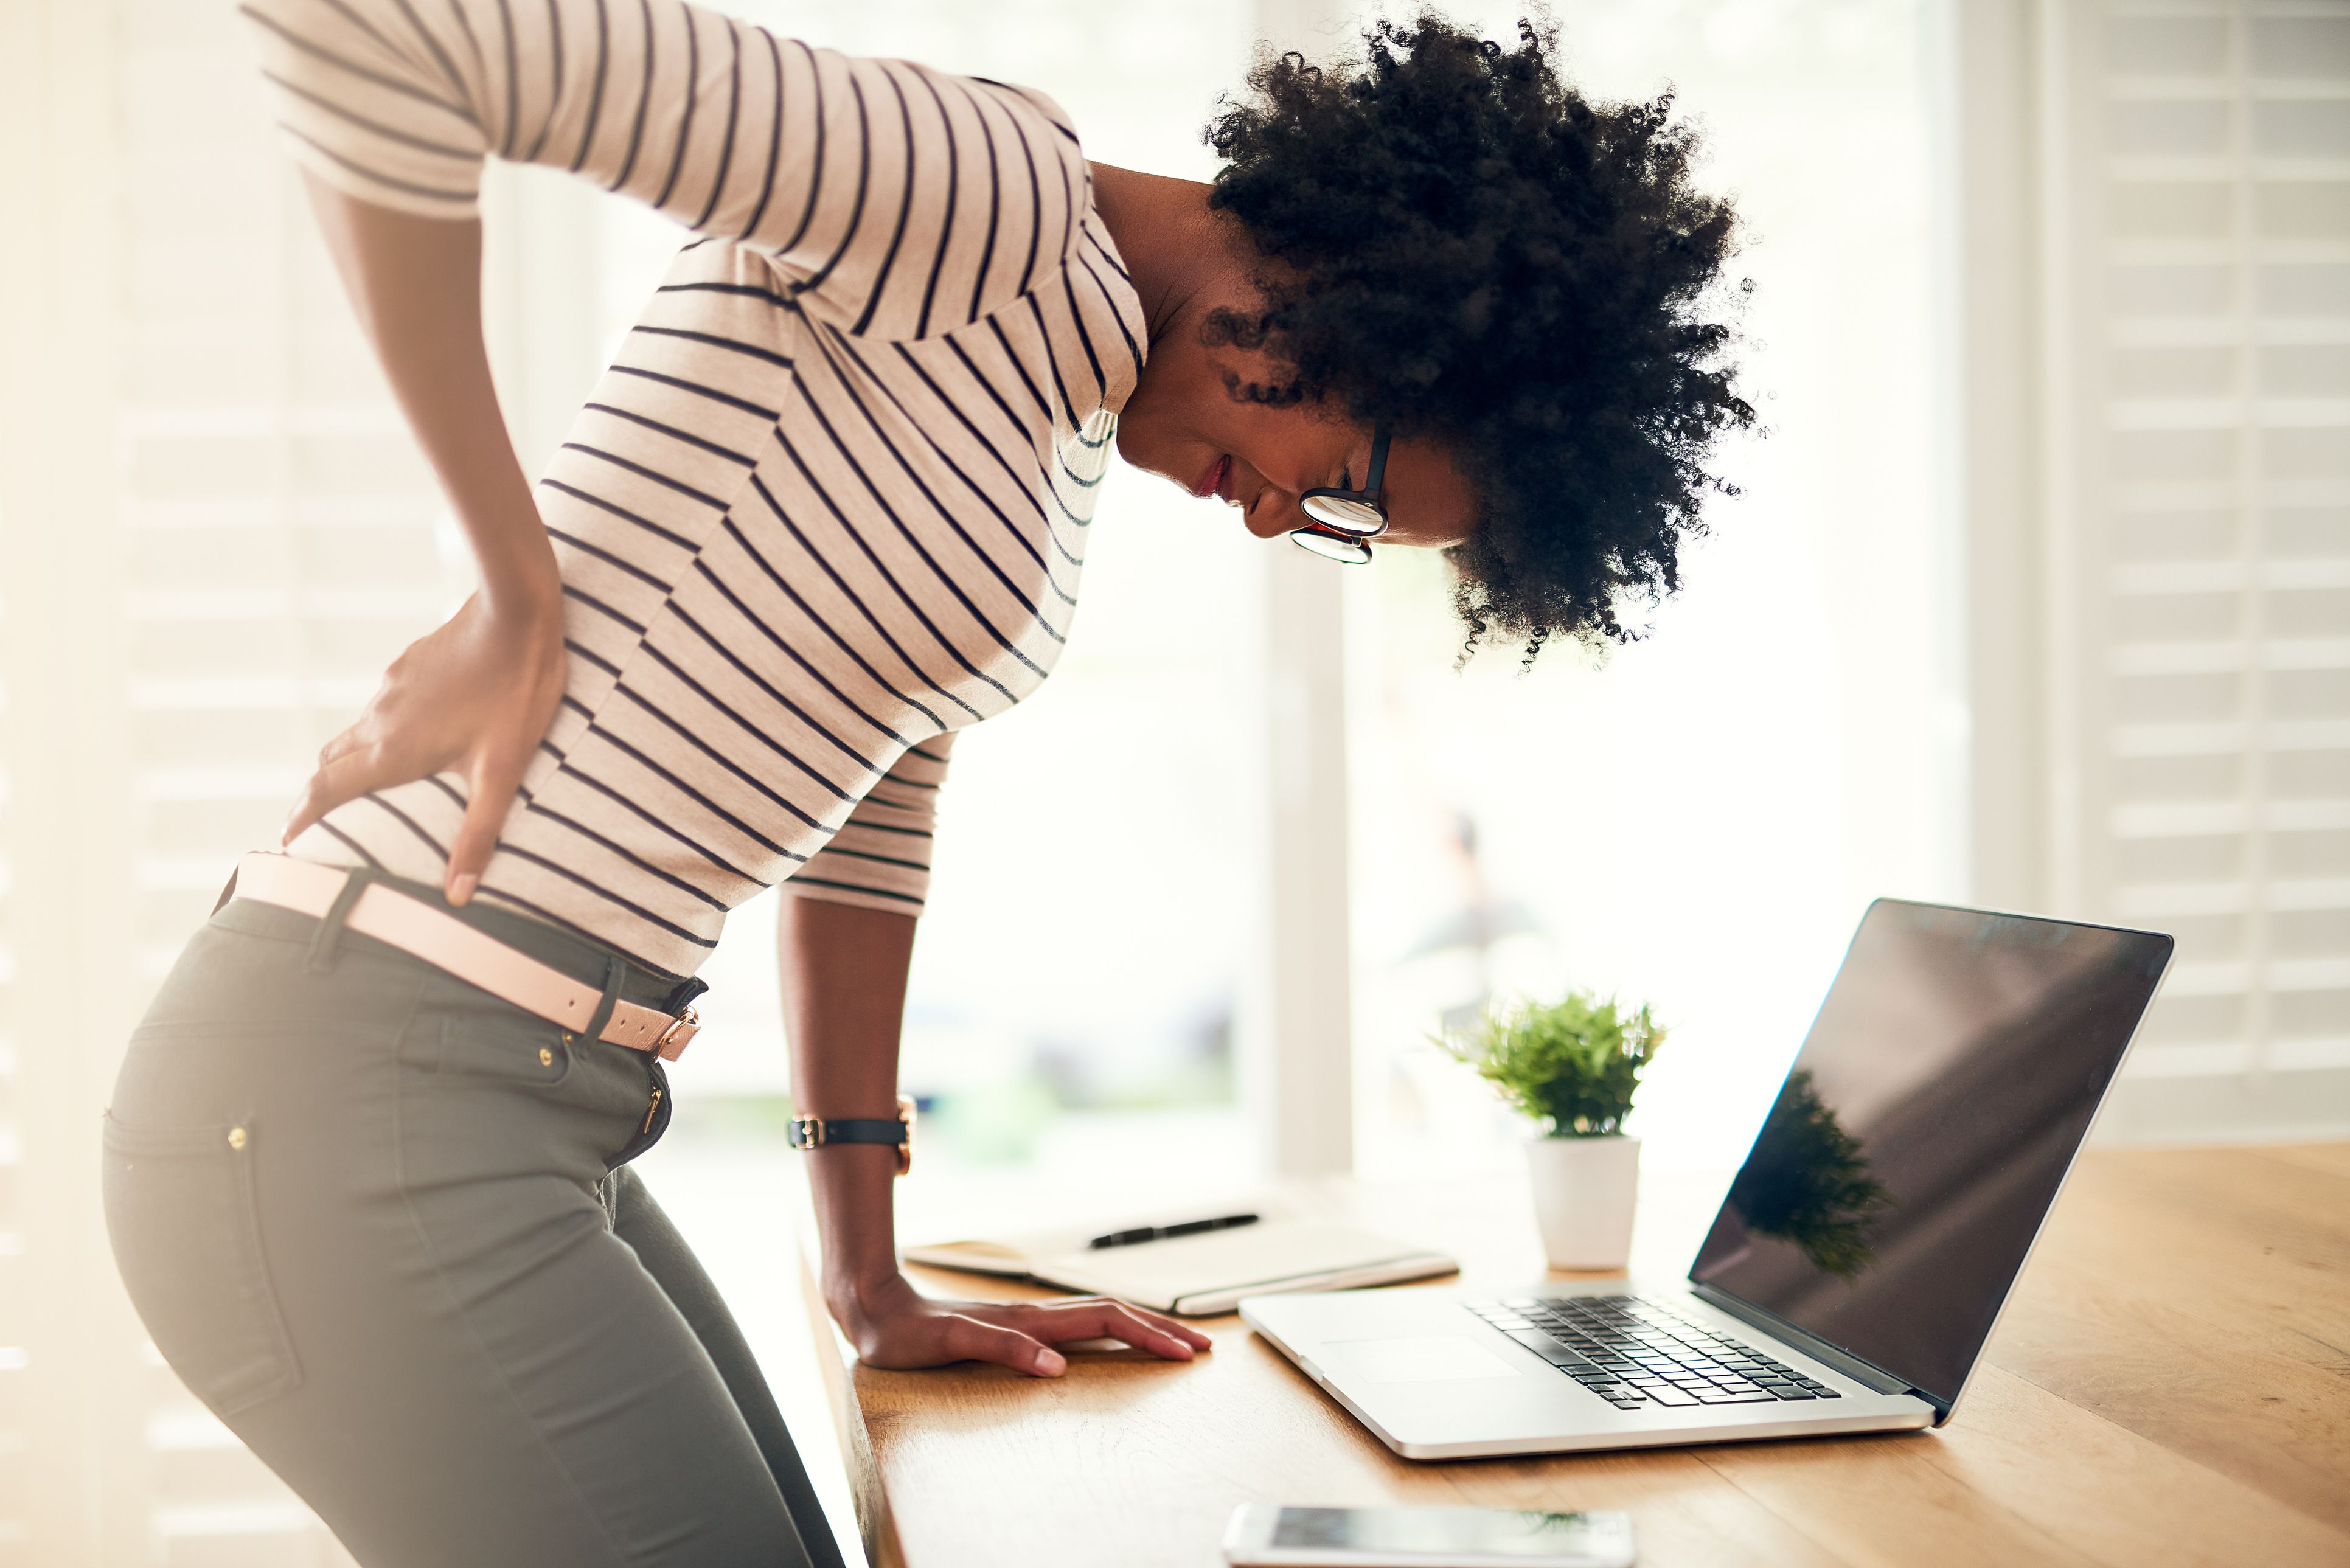 Can Poor Posture Lead to Chronic Pain?